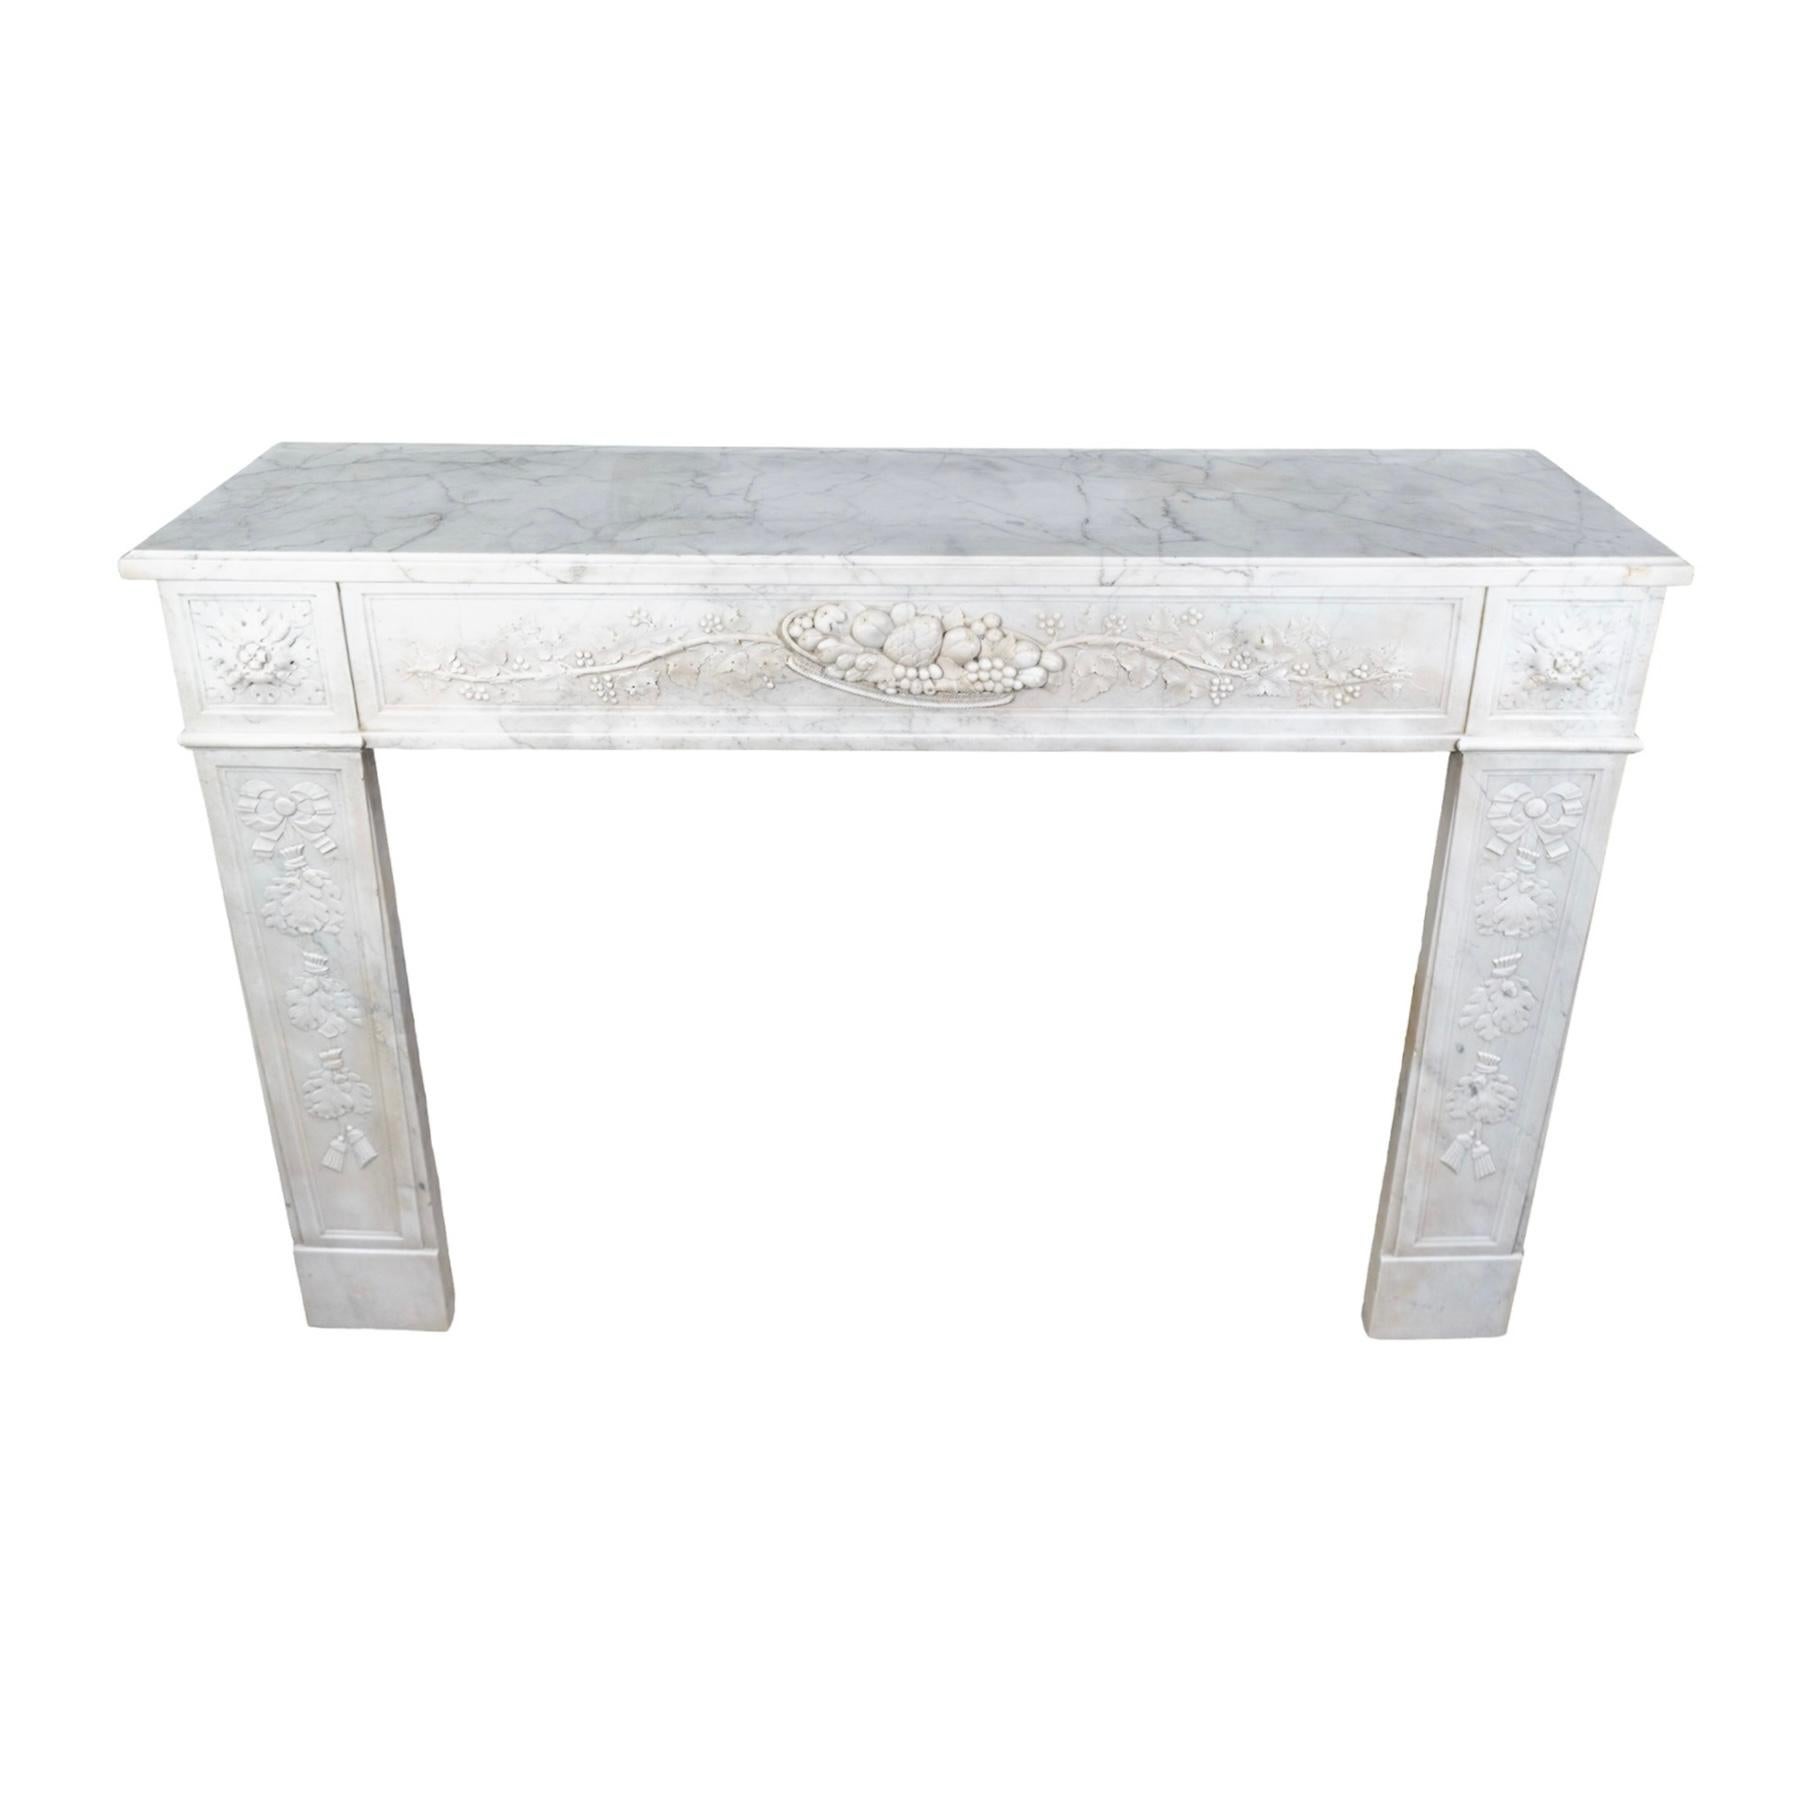 This mantel origins from Bordeaux in France, circa 1820.

Made with Carrara marble.

Firebox measurements: 46